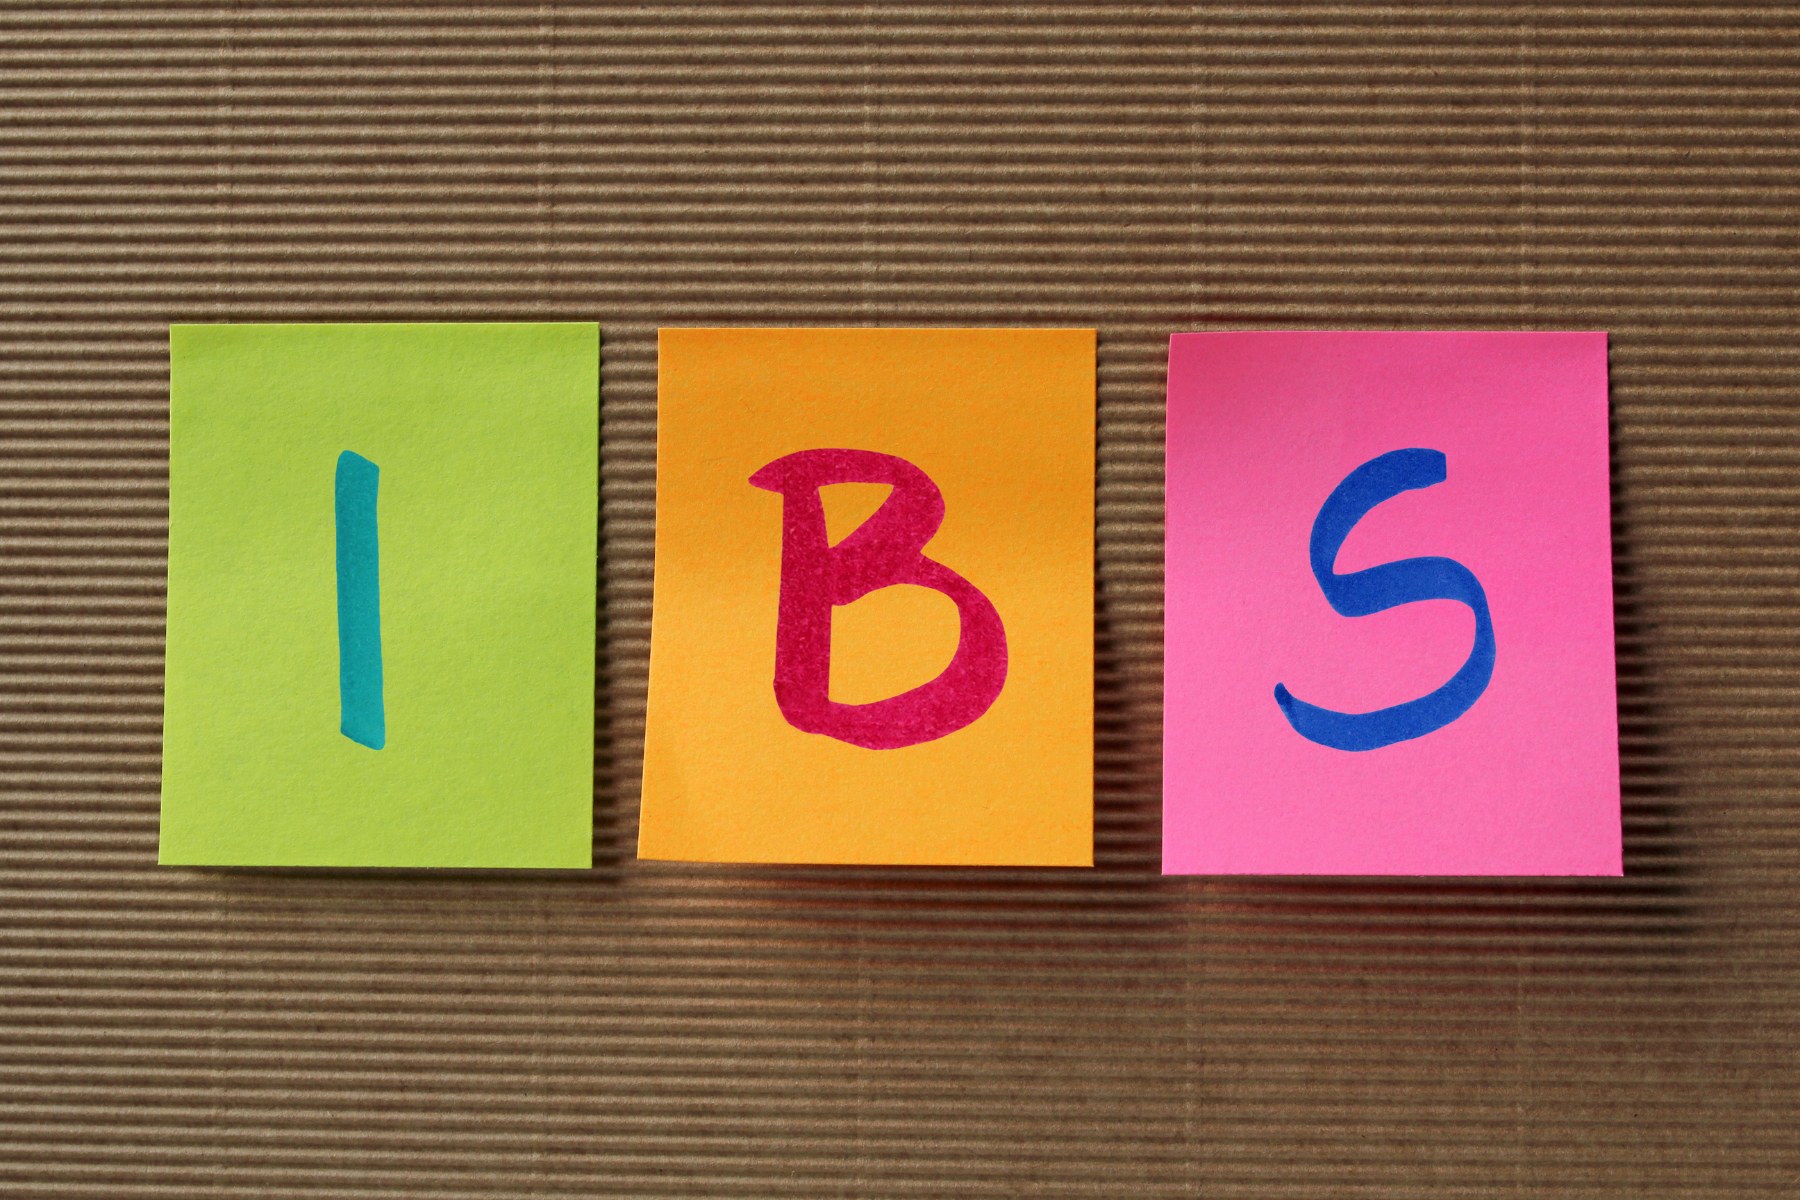 IBS - What Is It